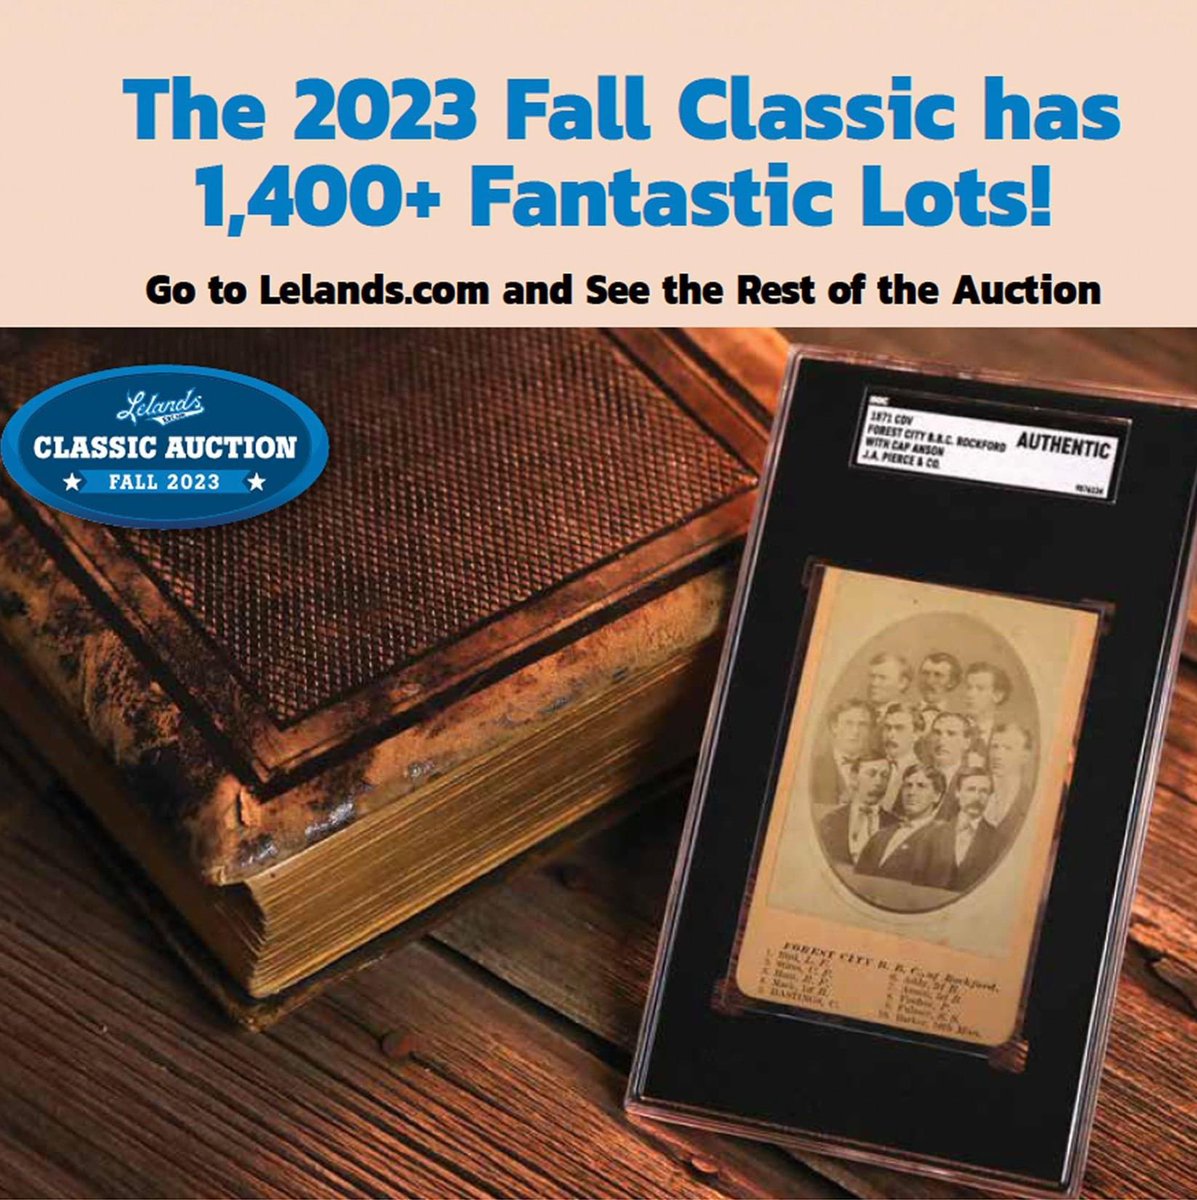 Are you missing this auction? Get there NOW! The Fall Classic features 1400+ fantastic lots of the most important sports cards and memorabilia. Go to the Classic and see what you can score! Bidding Ends at 10 PM ET tomorrow. lelands.com